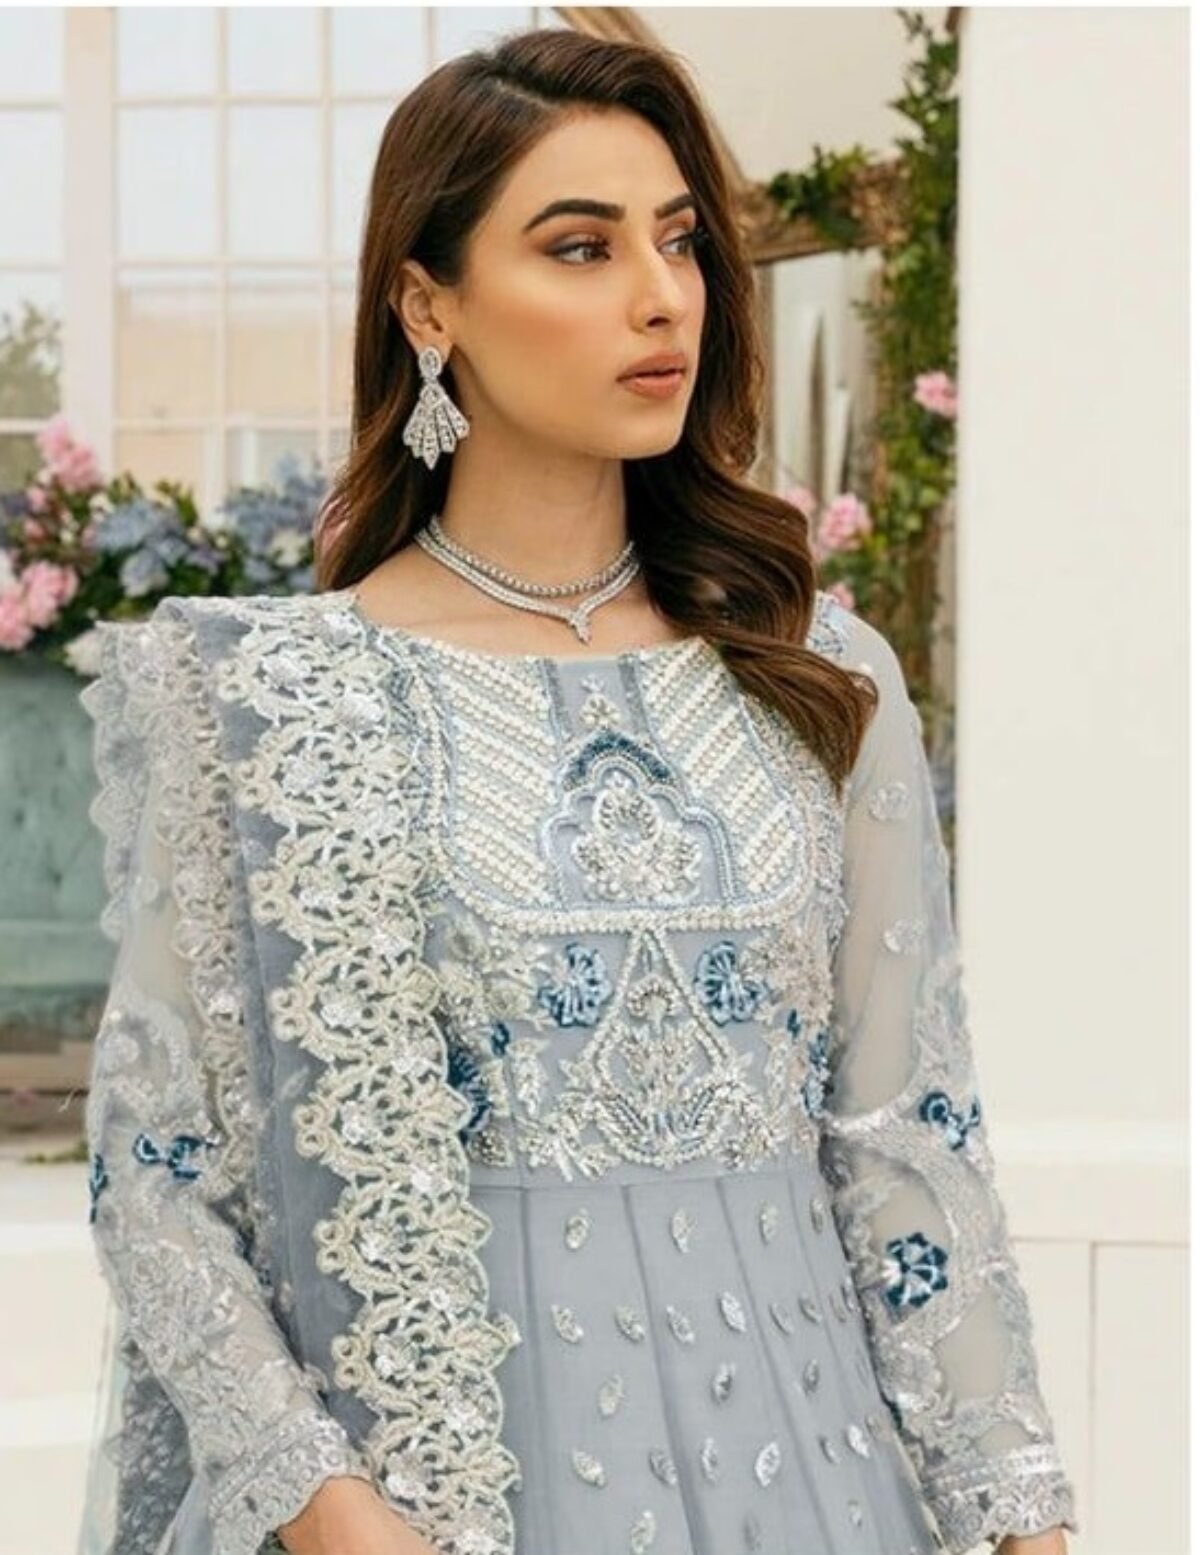 Silk Suits for Women - Buy Silk Suits Online in India | Libas